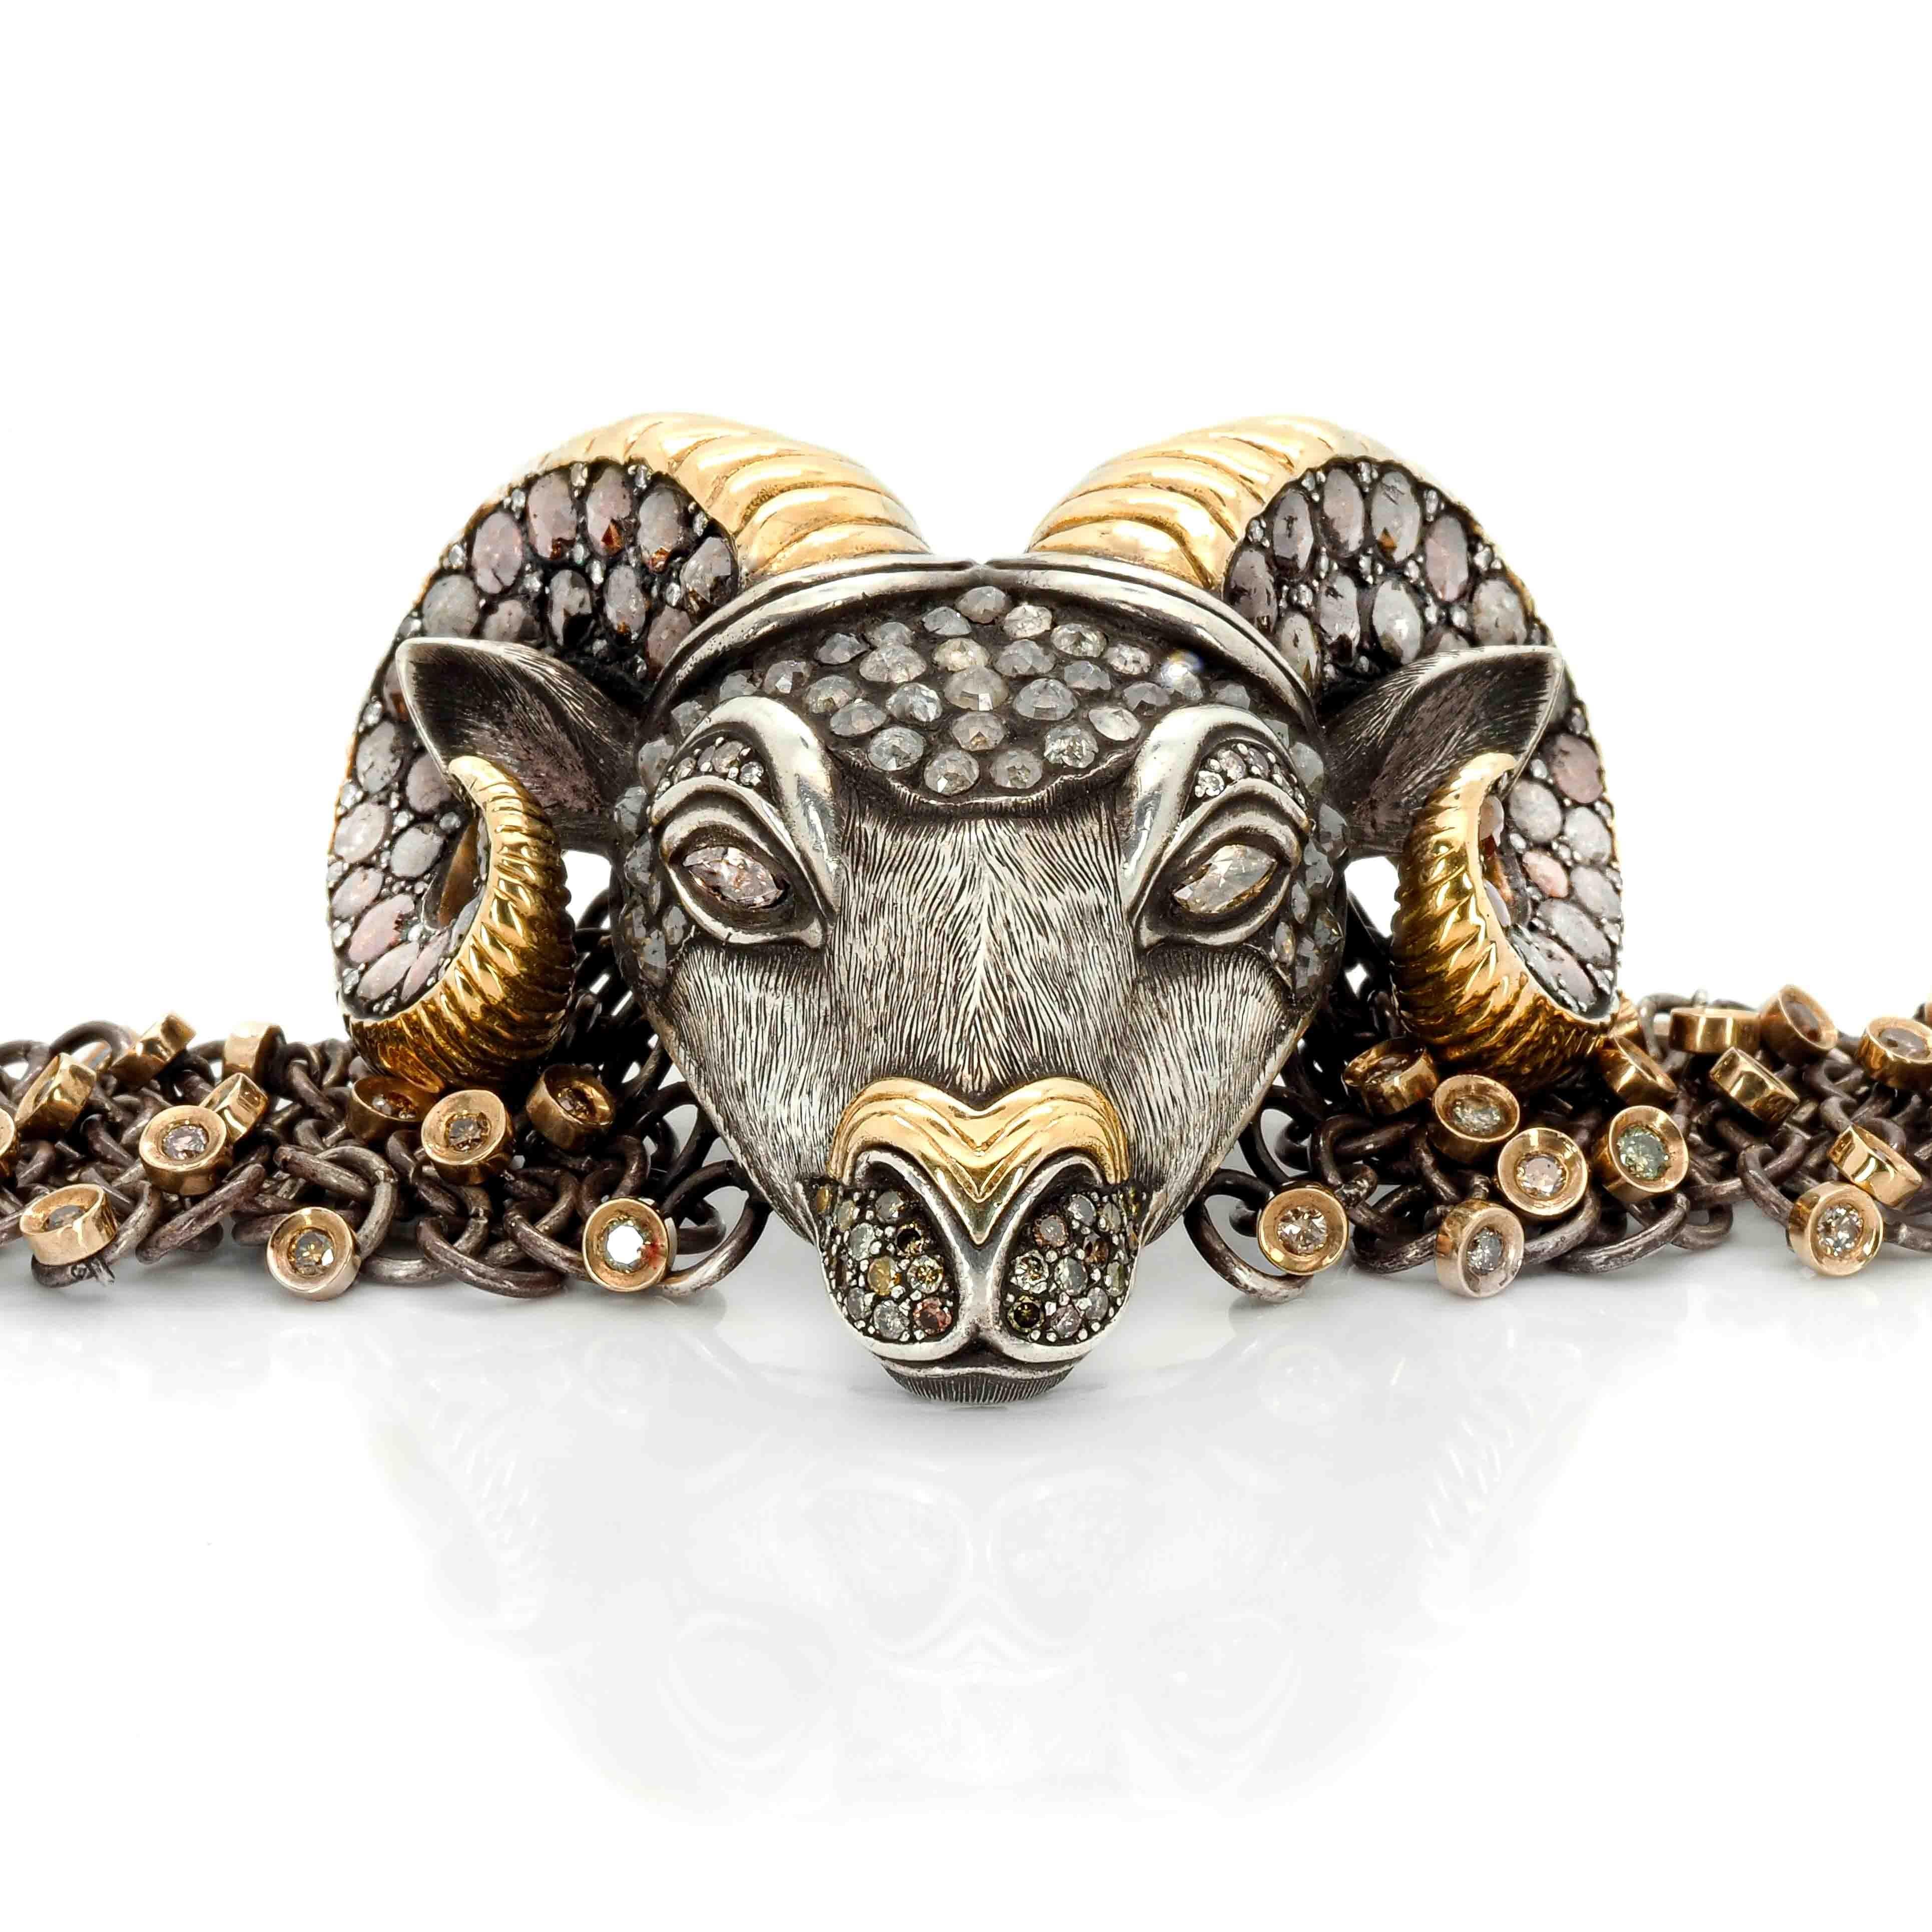 The signature series Ram Bracelet, handcrafted from 18k gold, sterling silver, and various diamonds is the epitome of luxury and elegance. The frontal view of the Ram's 18k gold horns is designed to resemble a spiral, a symbol of eternity. The Ram